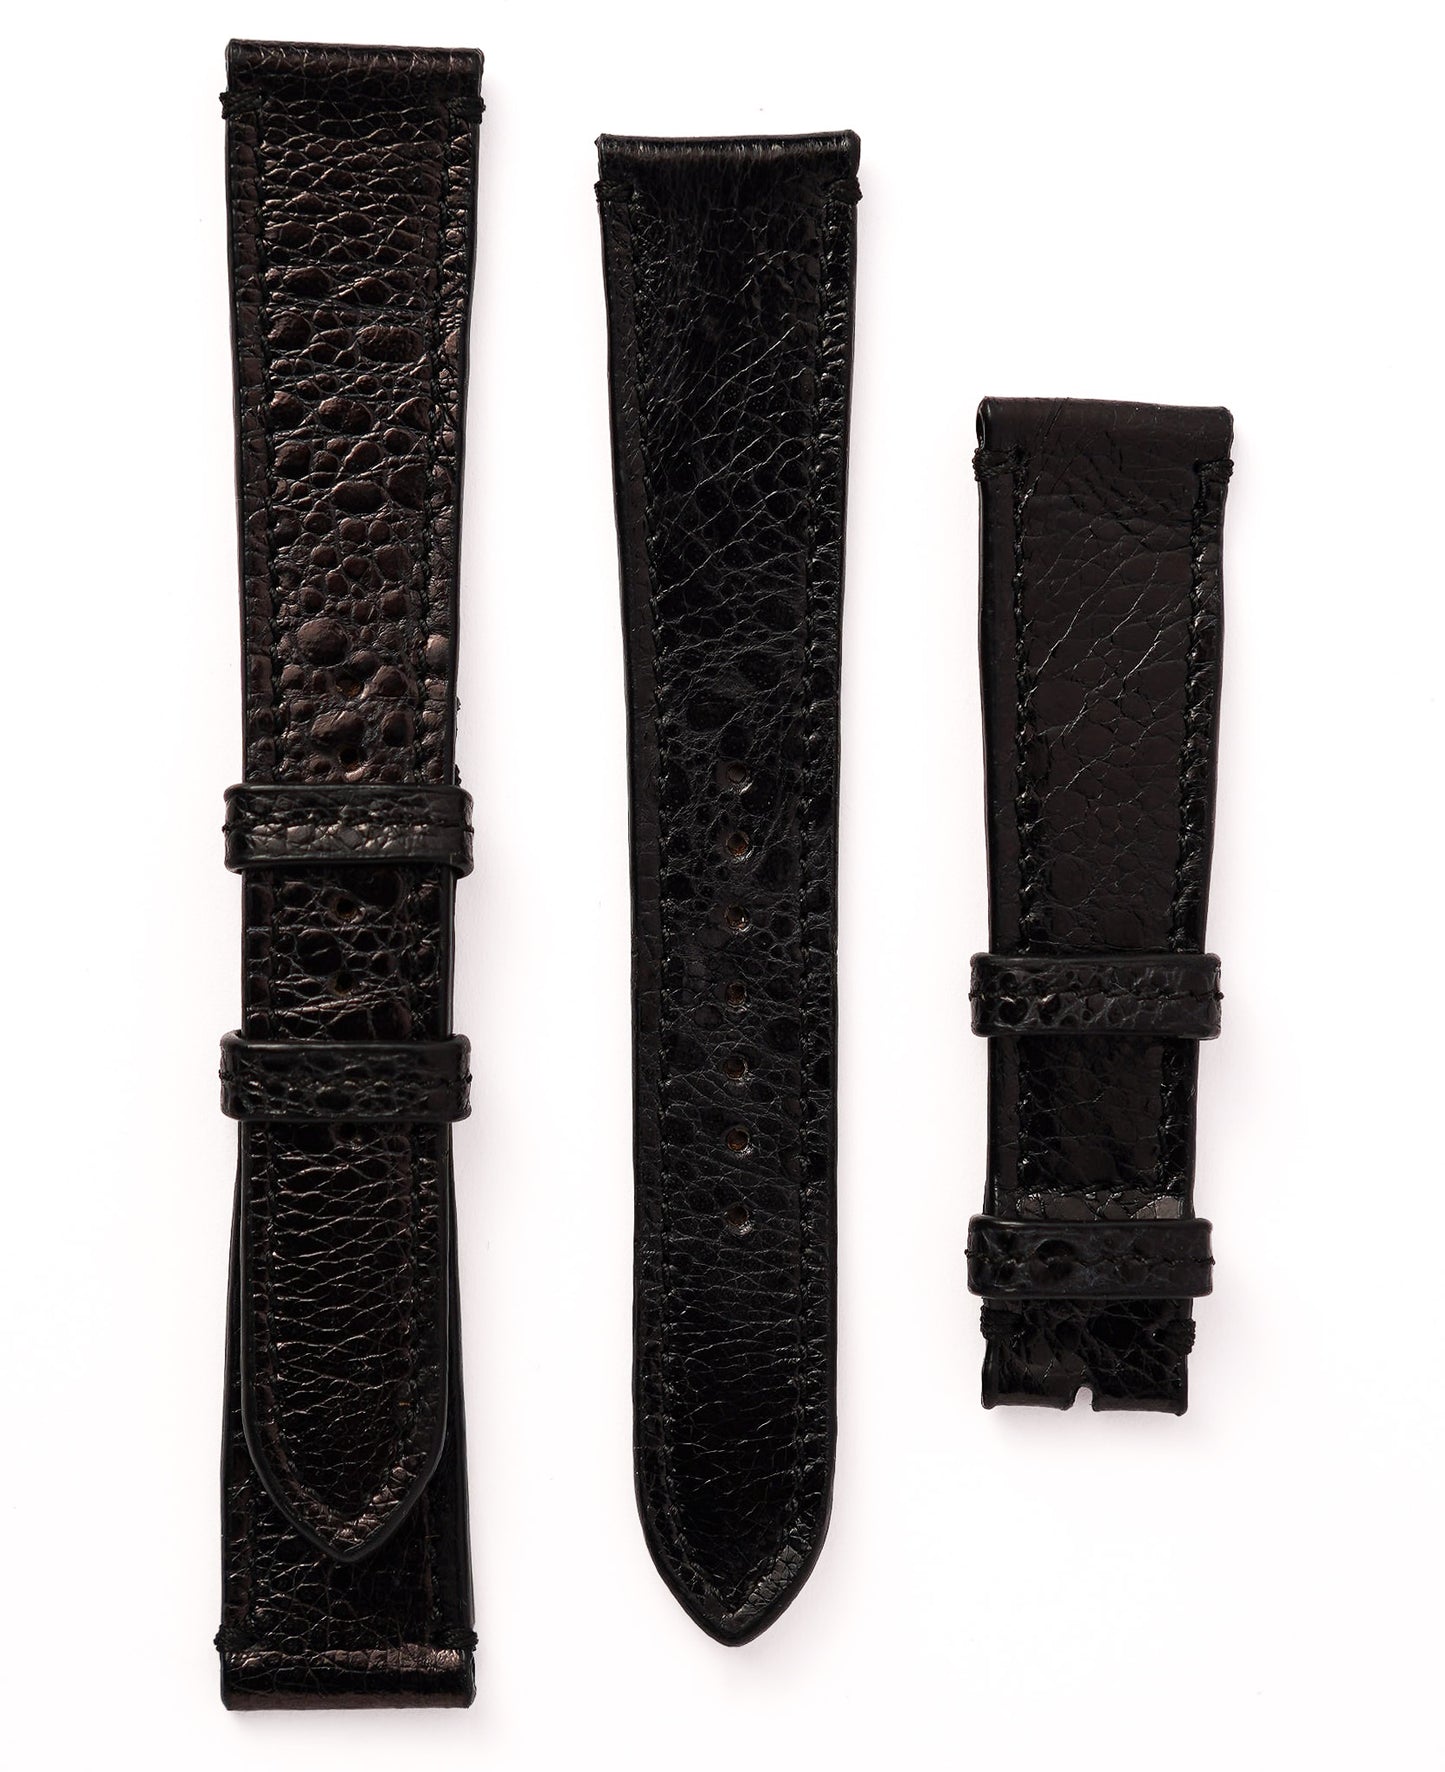 Cane Toad Leather Watch Strap - Black